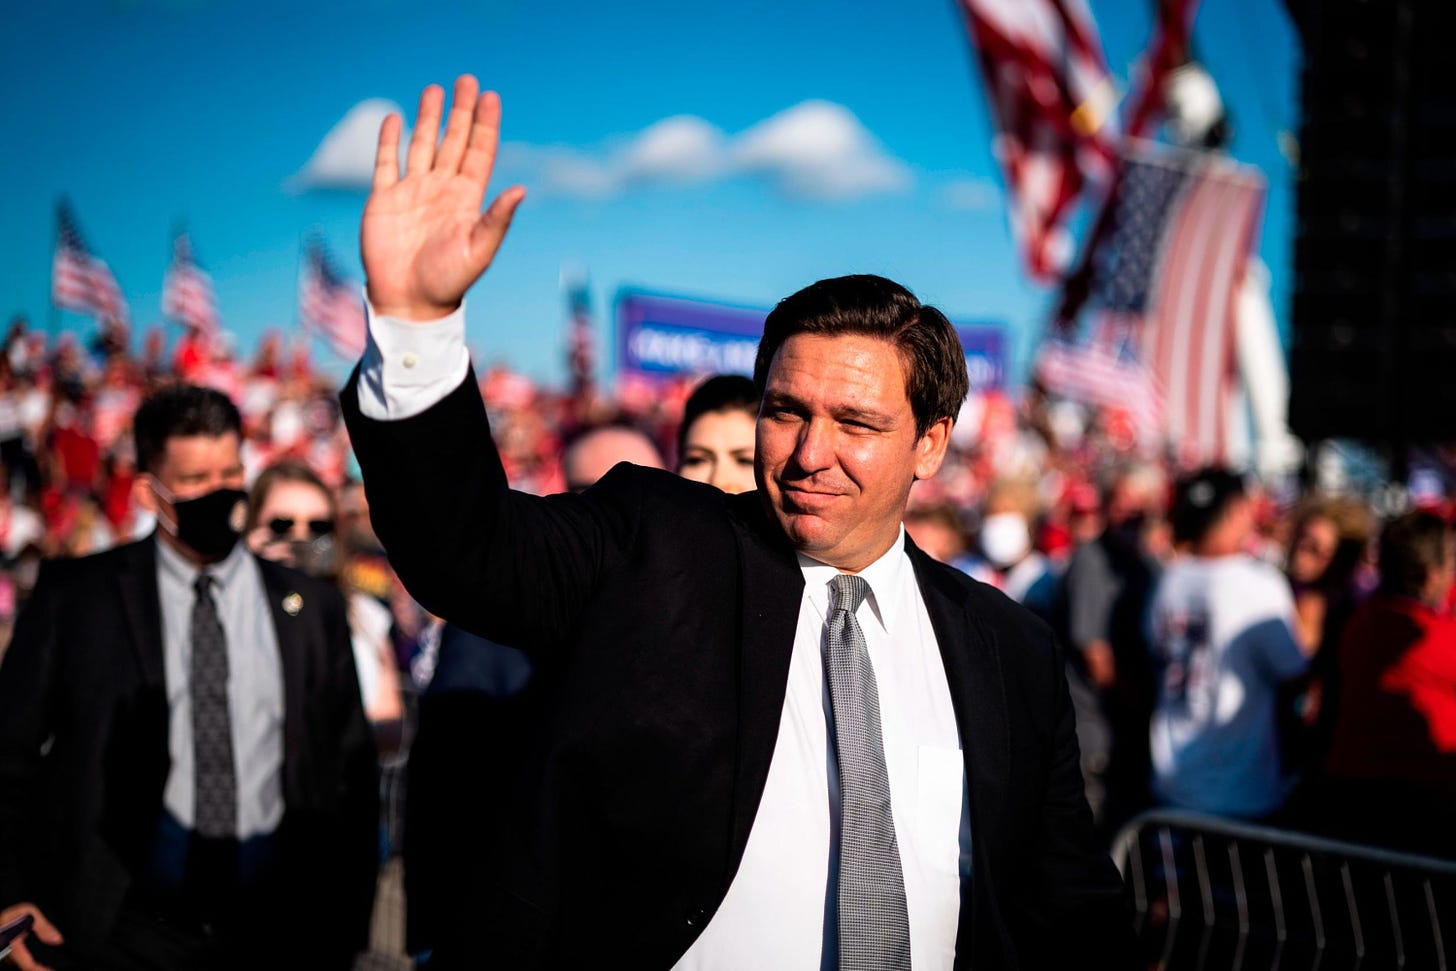 Florida Gov. Ron DeSantis waves before speaking at a rally in Orlando in 2020.